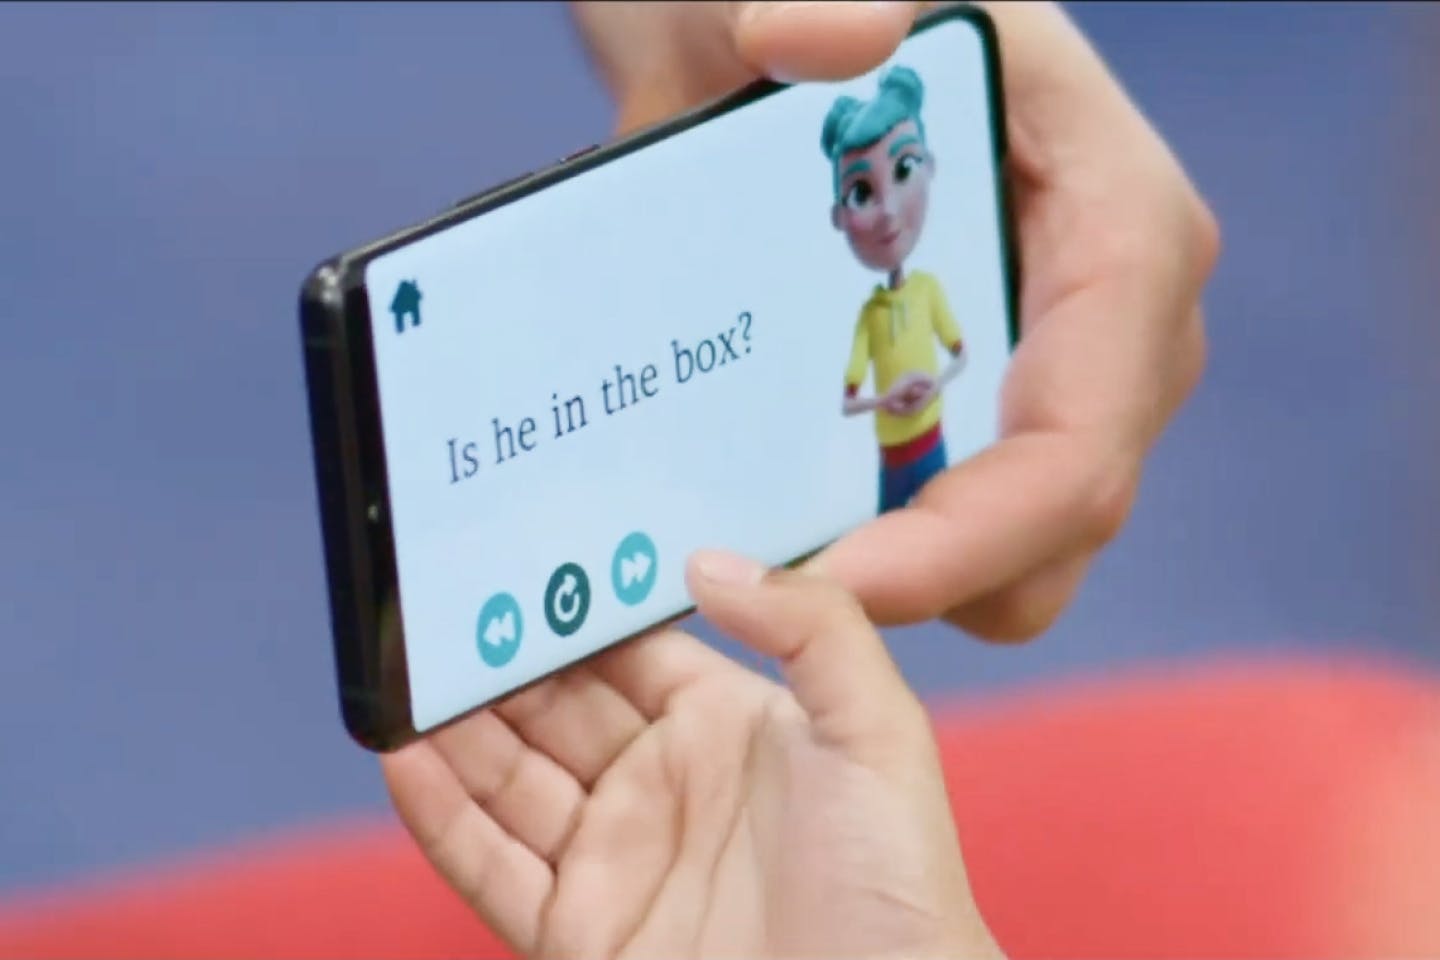 Storysign live on a phone in a child hand